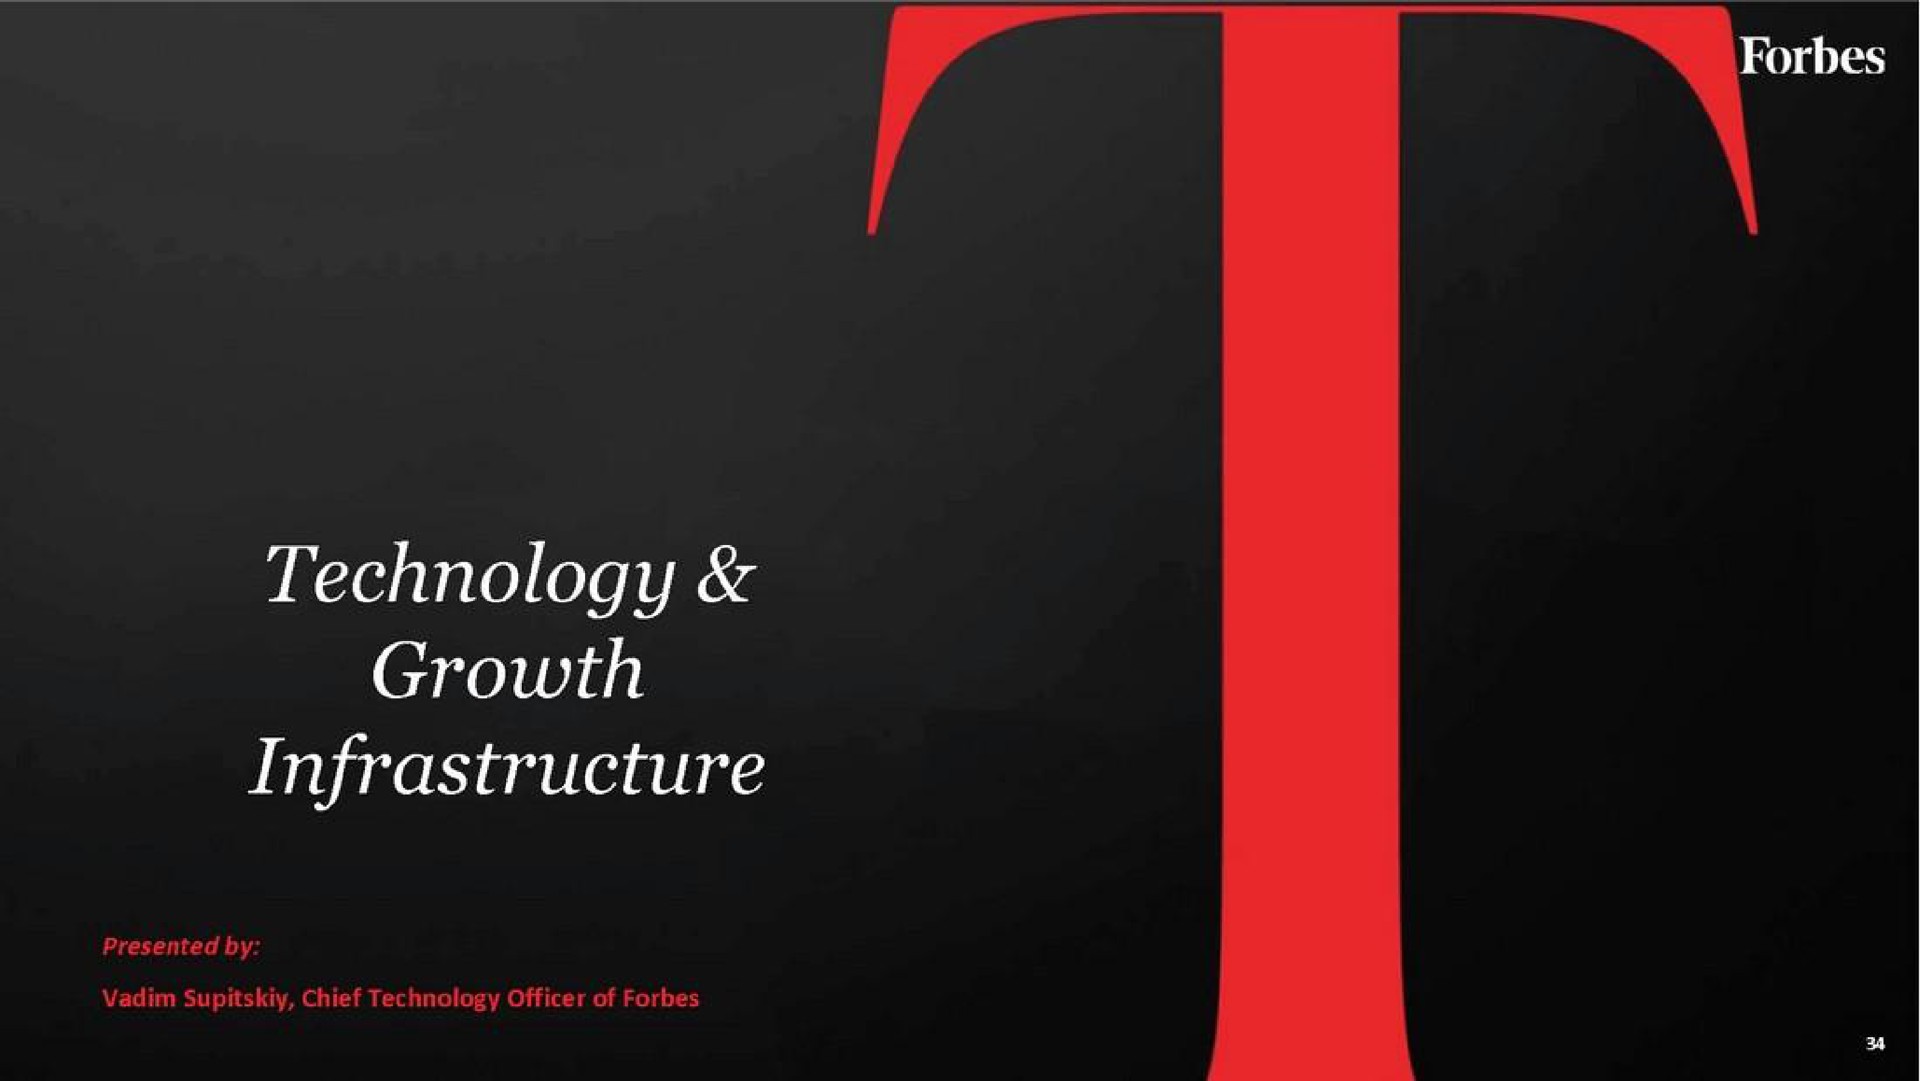 technology infrastructure | Forbes